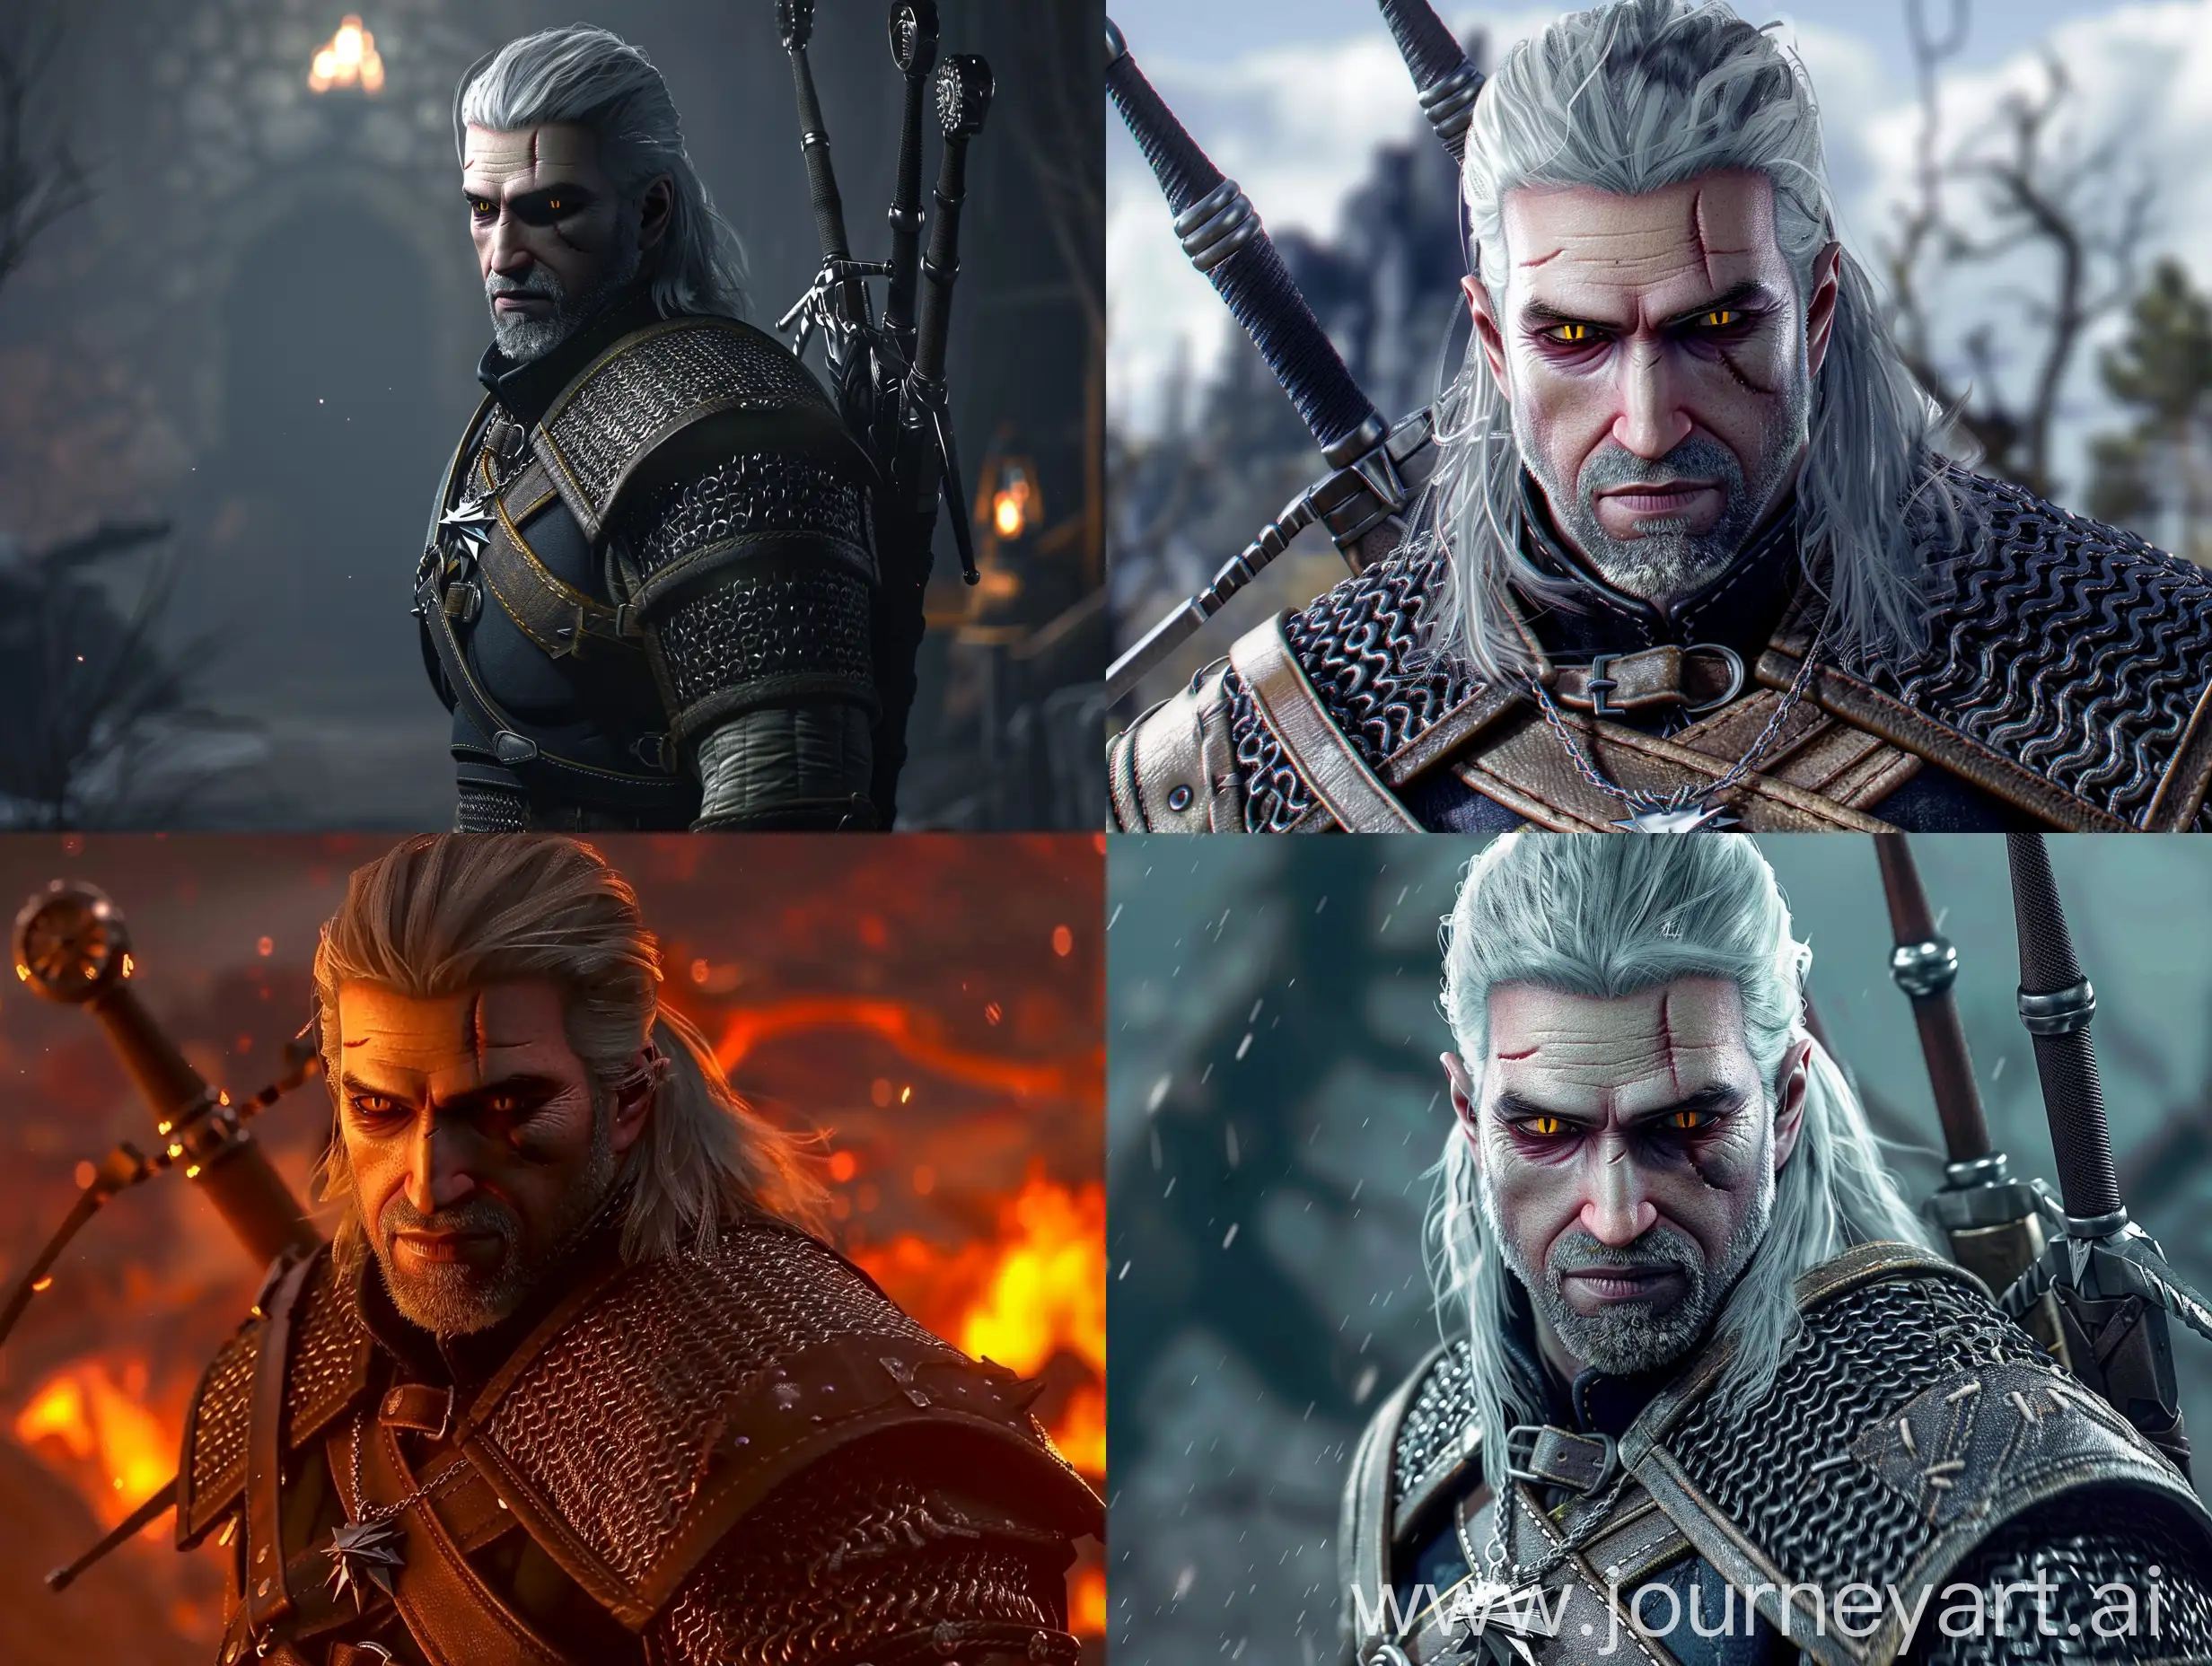 The Witcher 4K quality is super realistic and detailed 